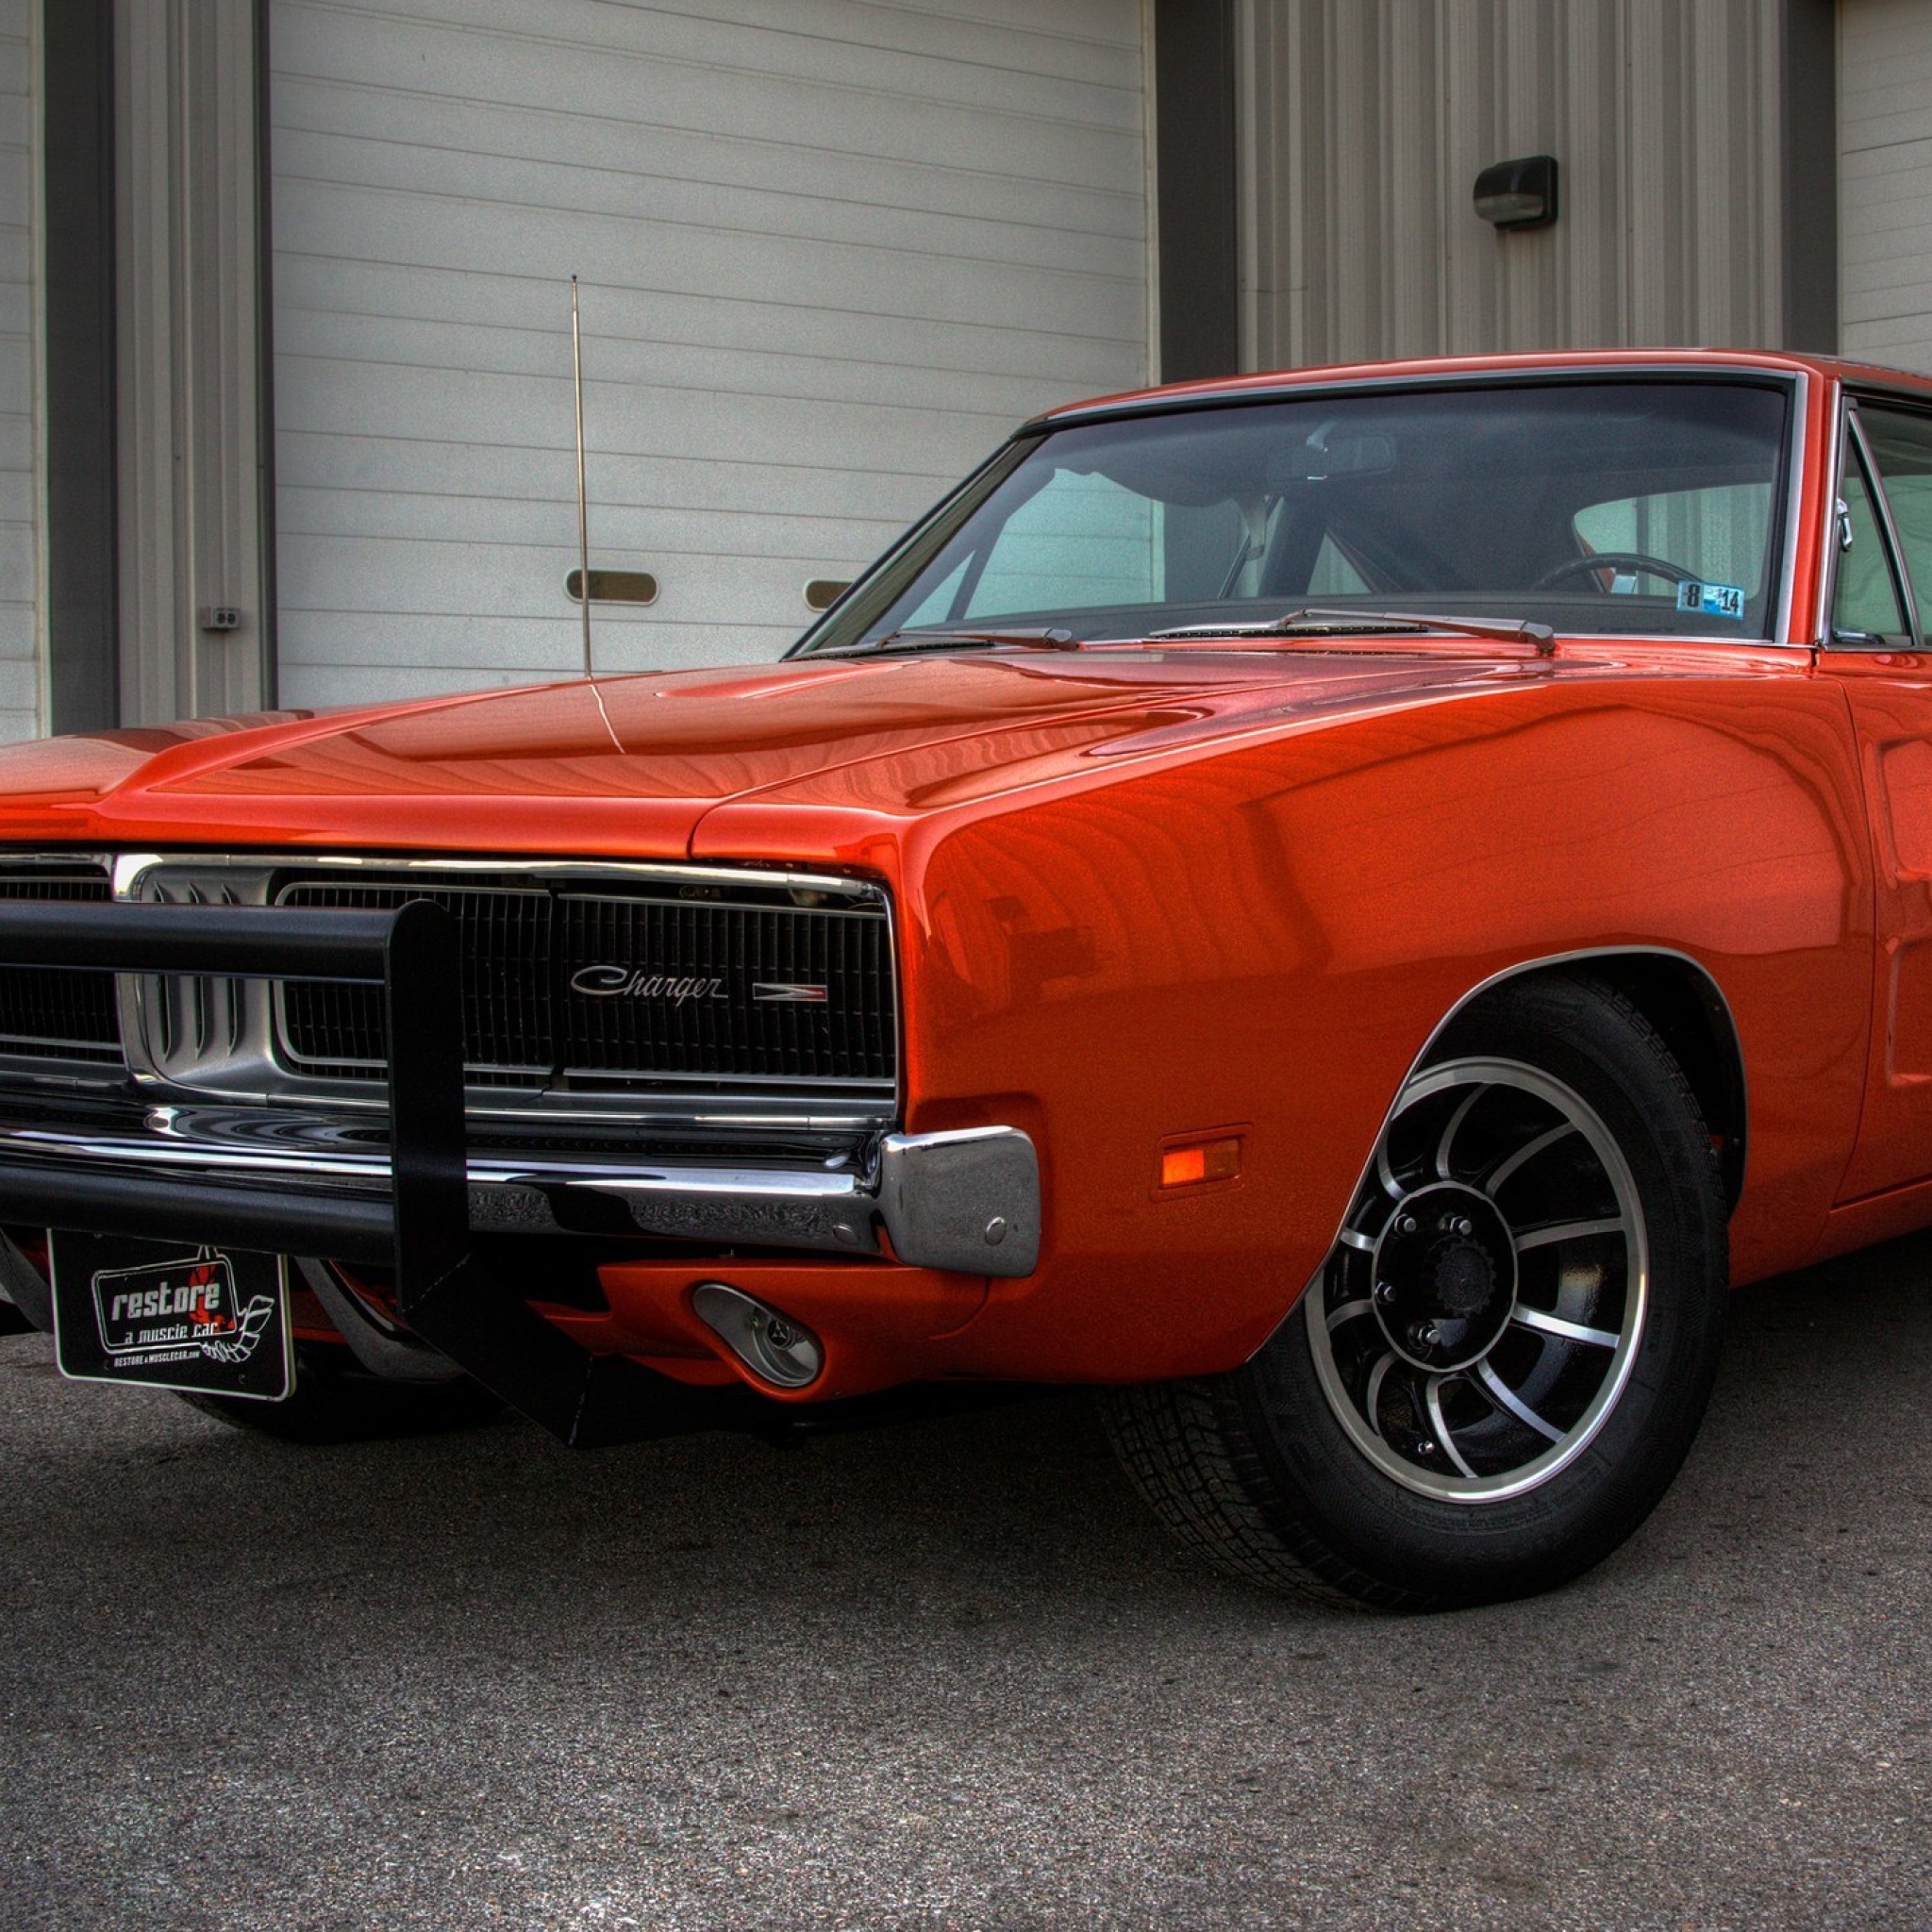 1969 Dodge Charger wallpaper 2048x2048